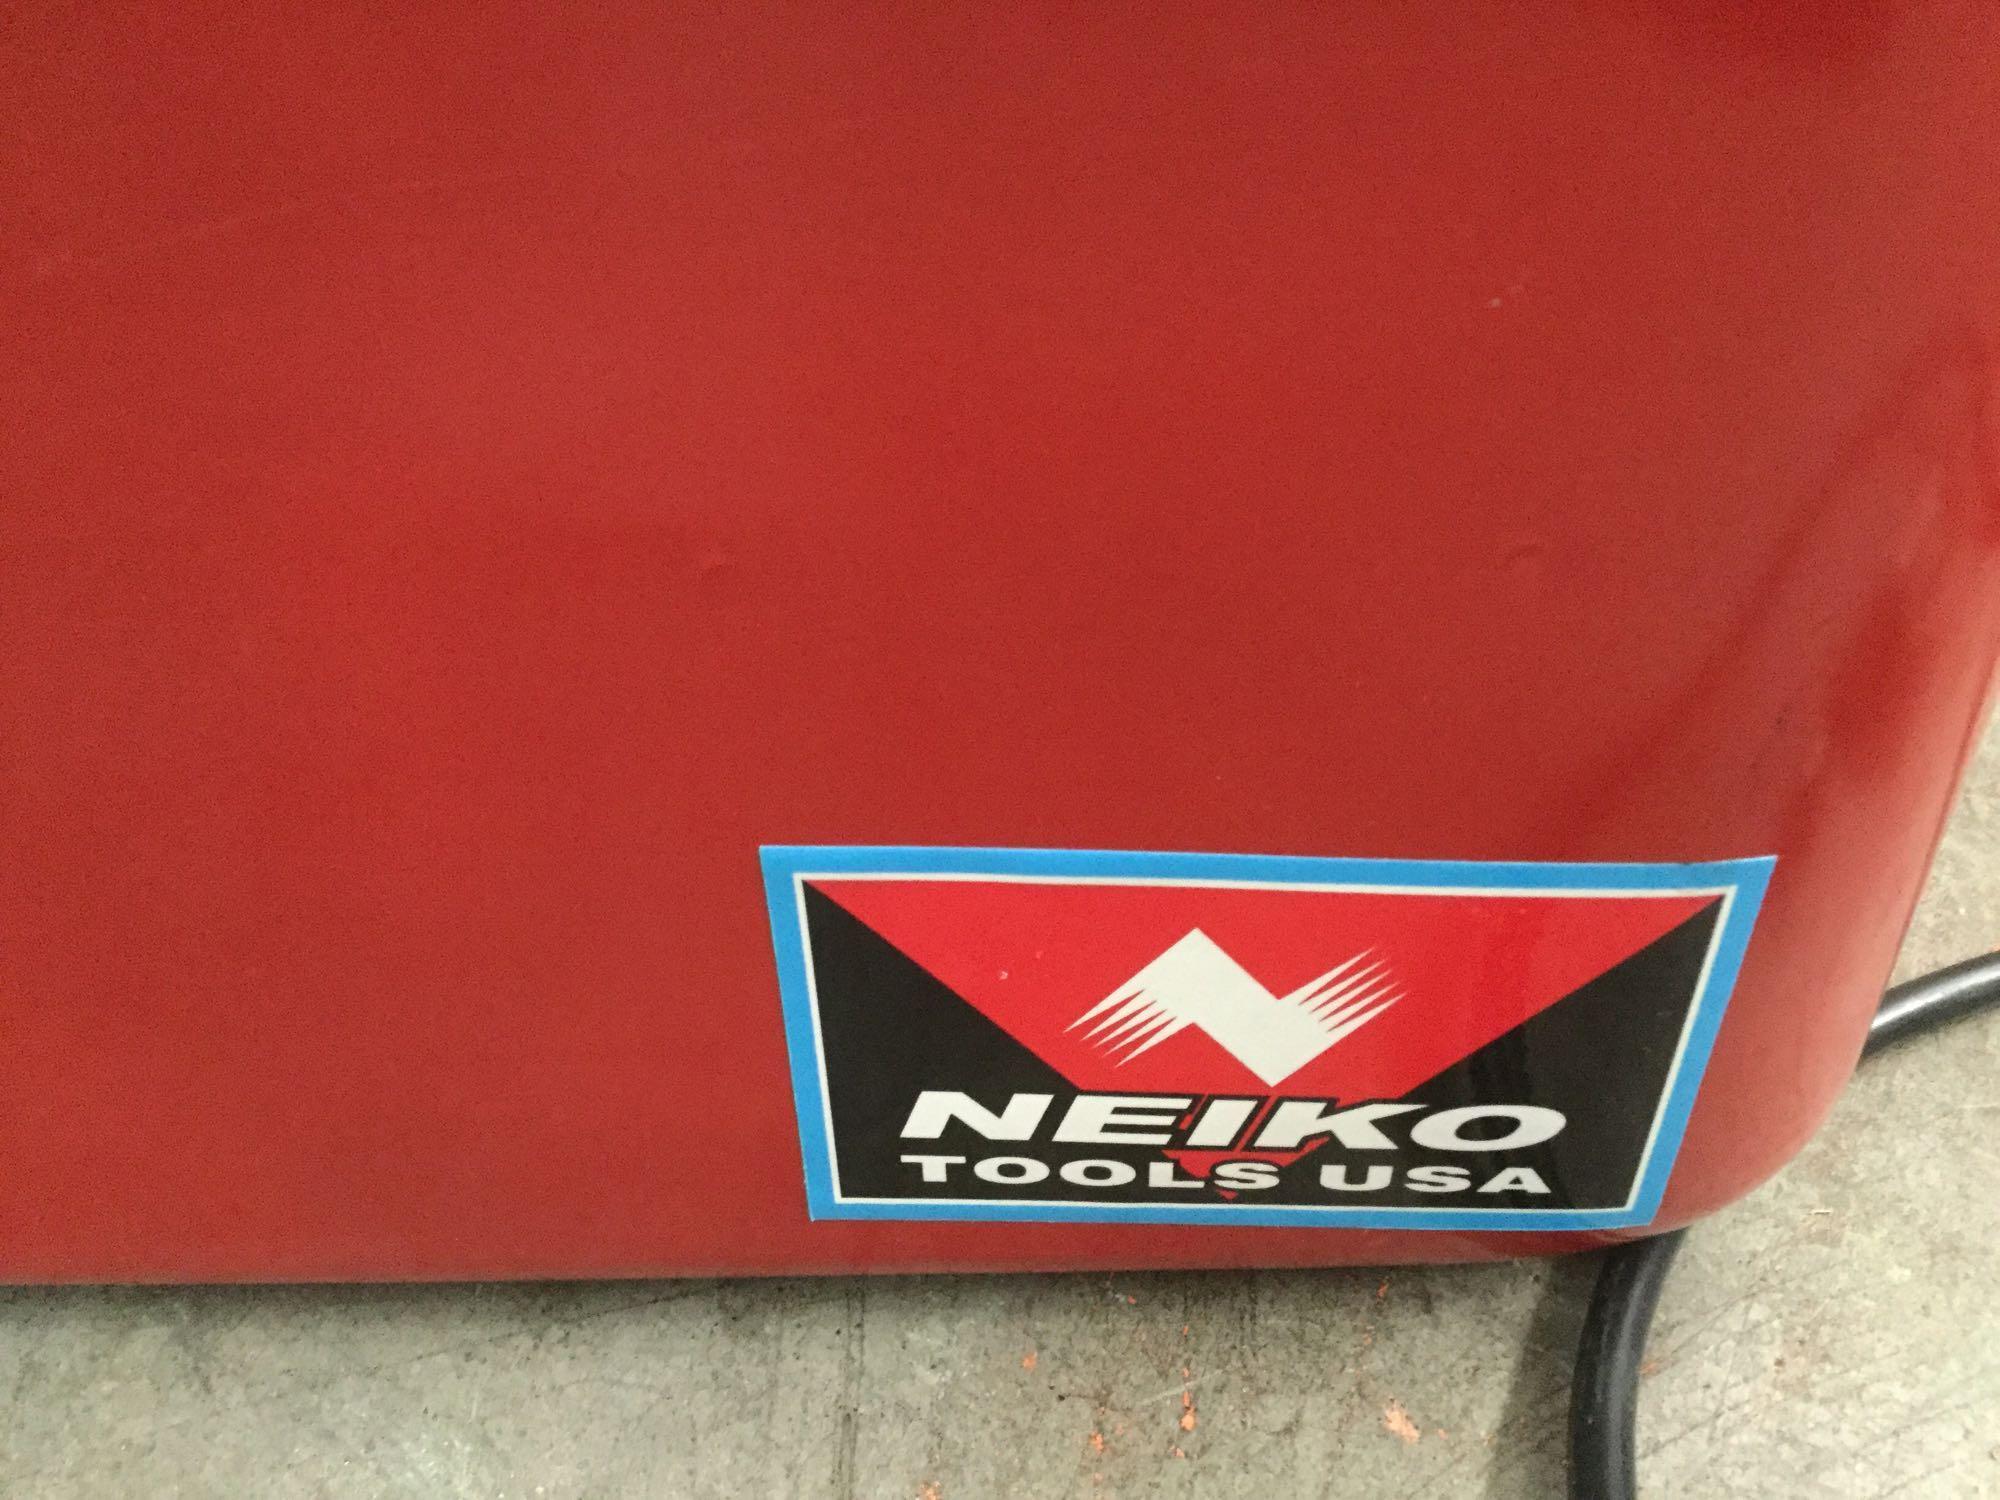 Neiko Tools USA 3.5 gallon parts washer - appears unused